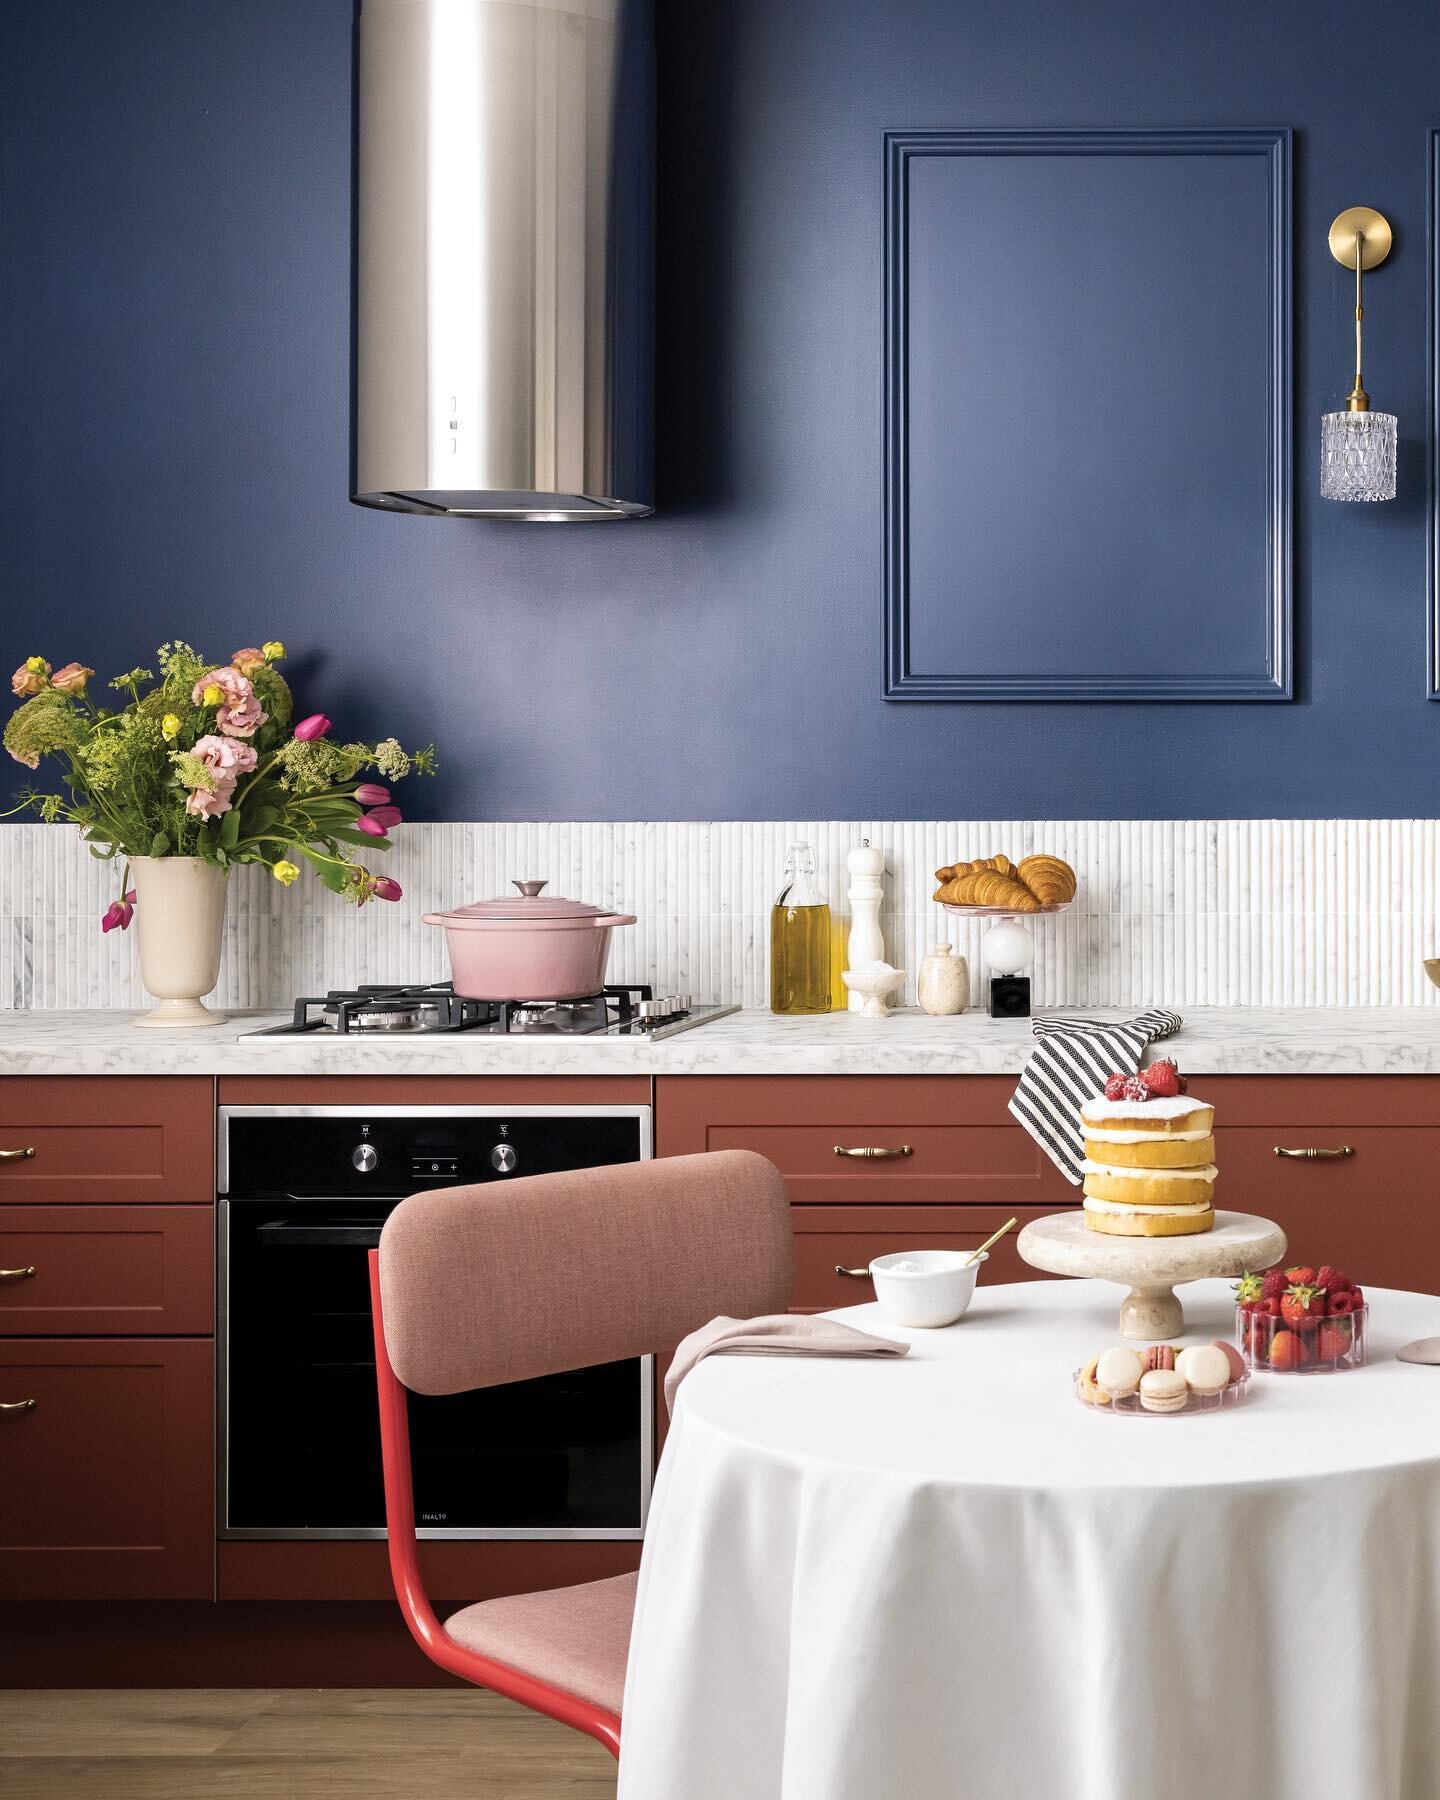 Introducing 𝘐𝘕𝘋𝘜𝘓𝘎𝘌, one of the bold new colour palettes from the @kaboodlekitchen new Trends range. 

Inspired by European charm and Parisian kitchens, the combination of the deep burgundy Paprika, brass accents and marble tones evokes a clas